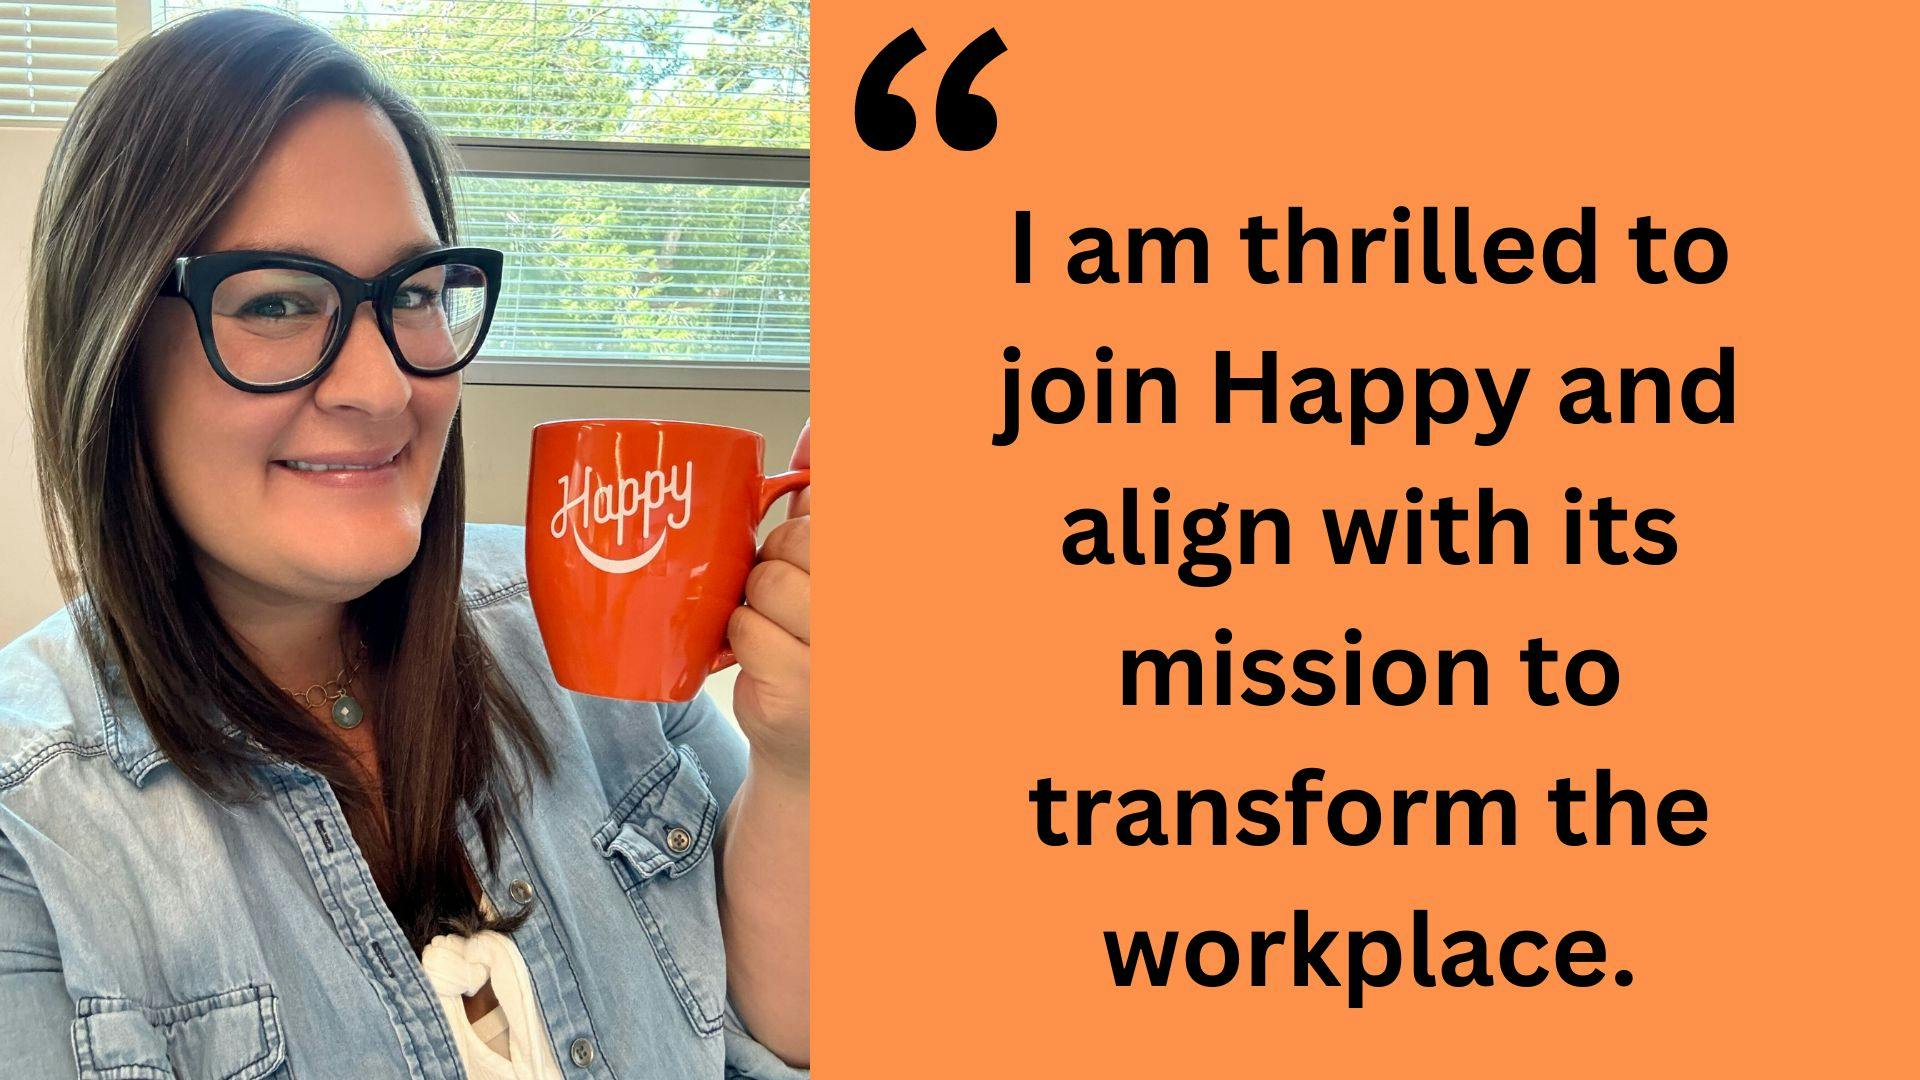 image of Rahshea Cardiff next to text that reads: "I am thrilled to join Happy and align with its mission to transform the workplace." Quote by Rahshea Cardiff. 